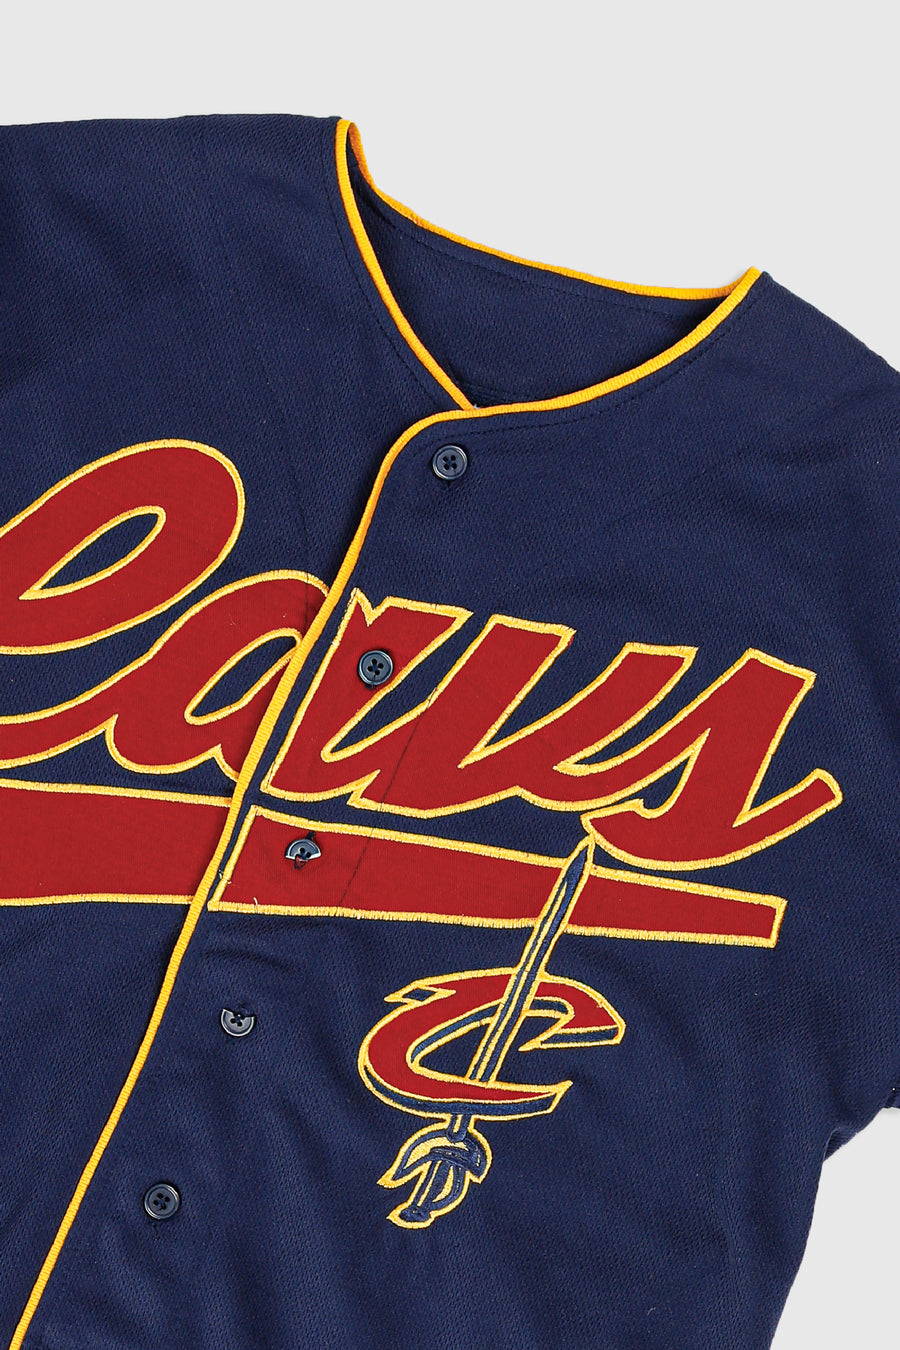 Vintage Cavaliers Basketball Jersey - S